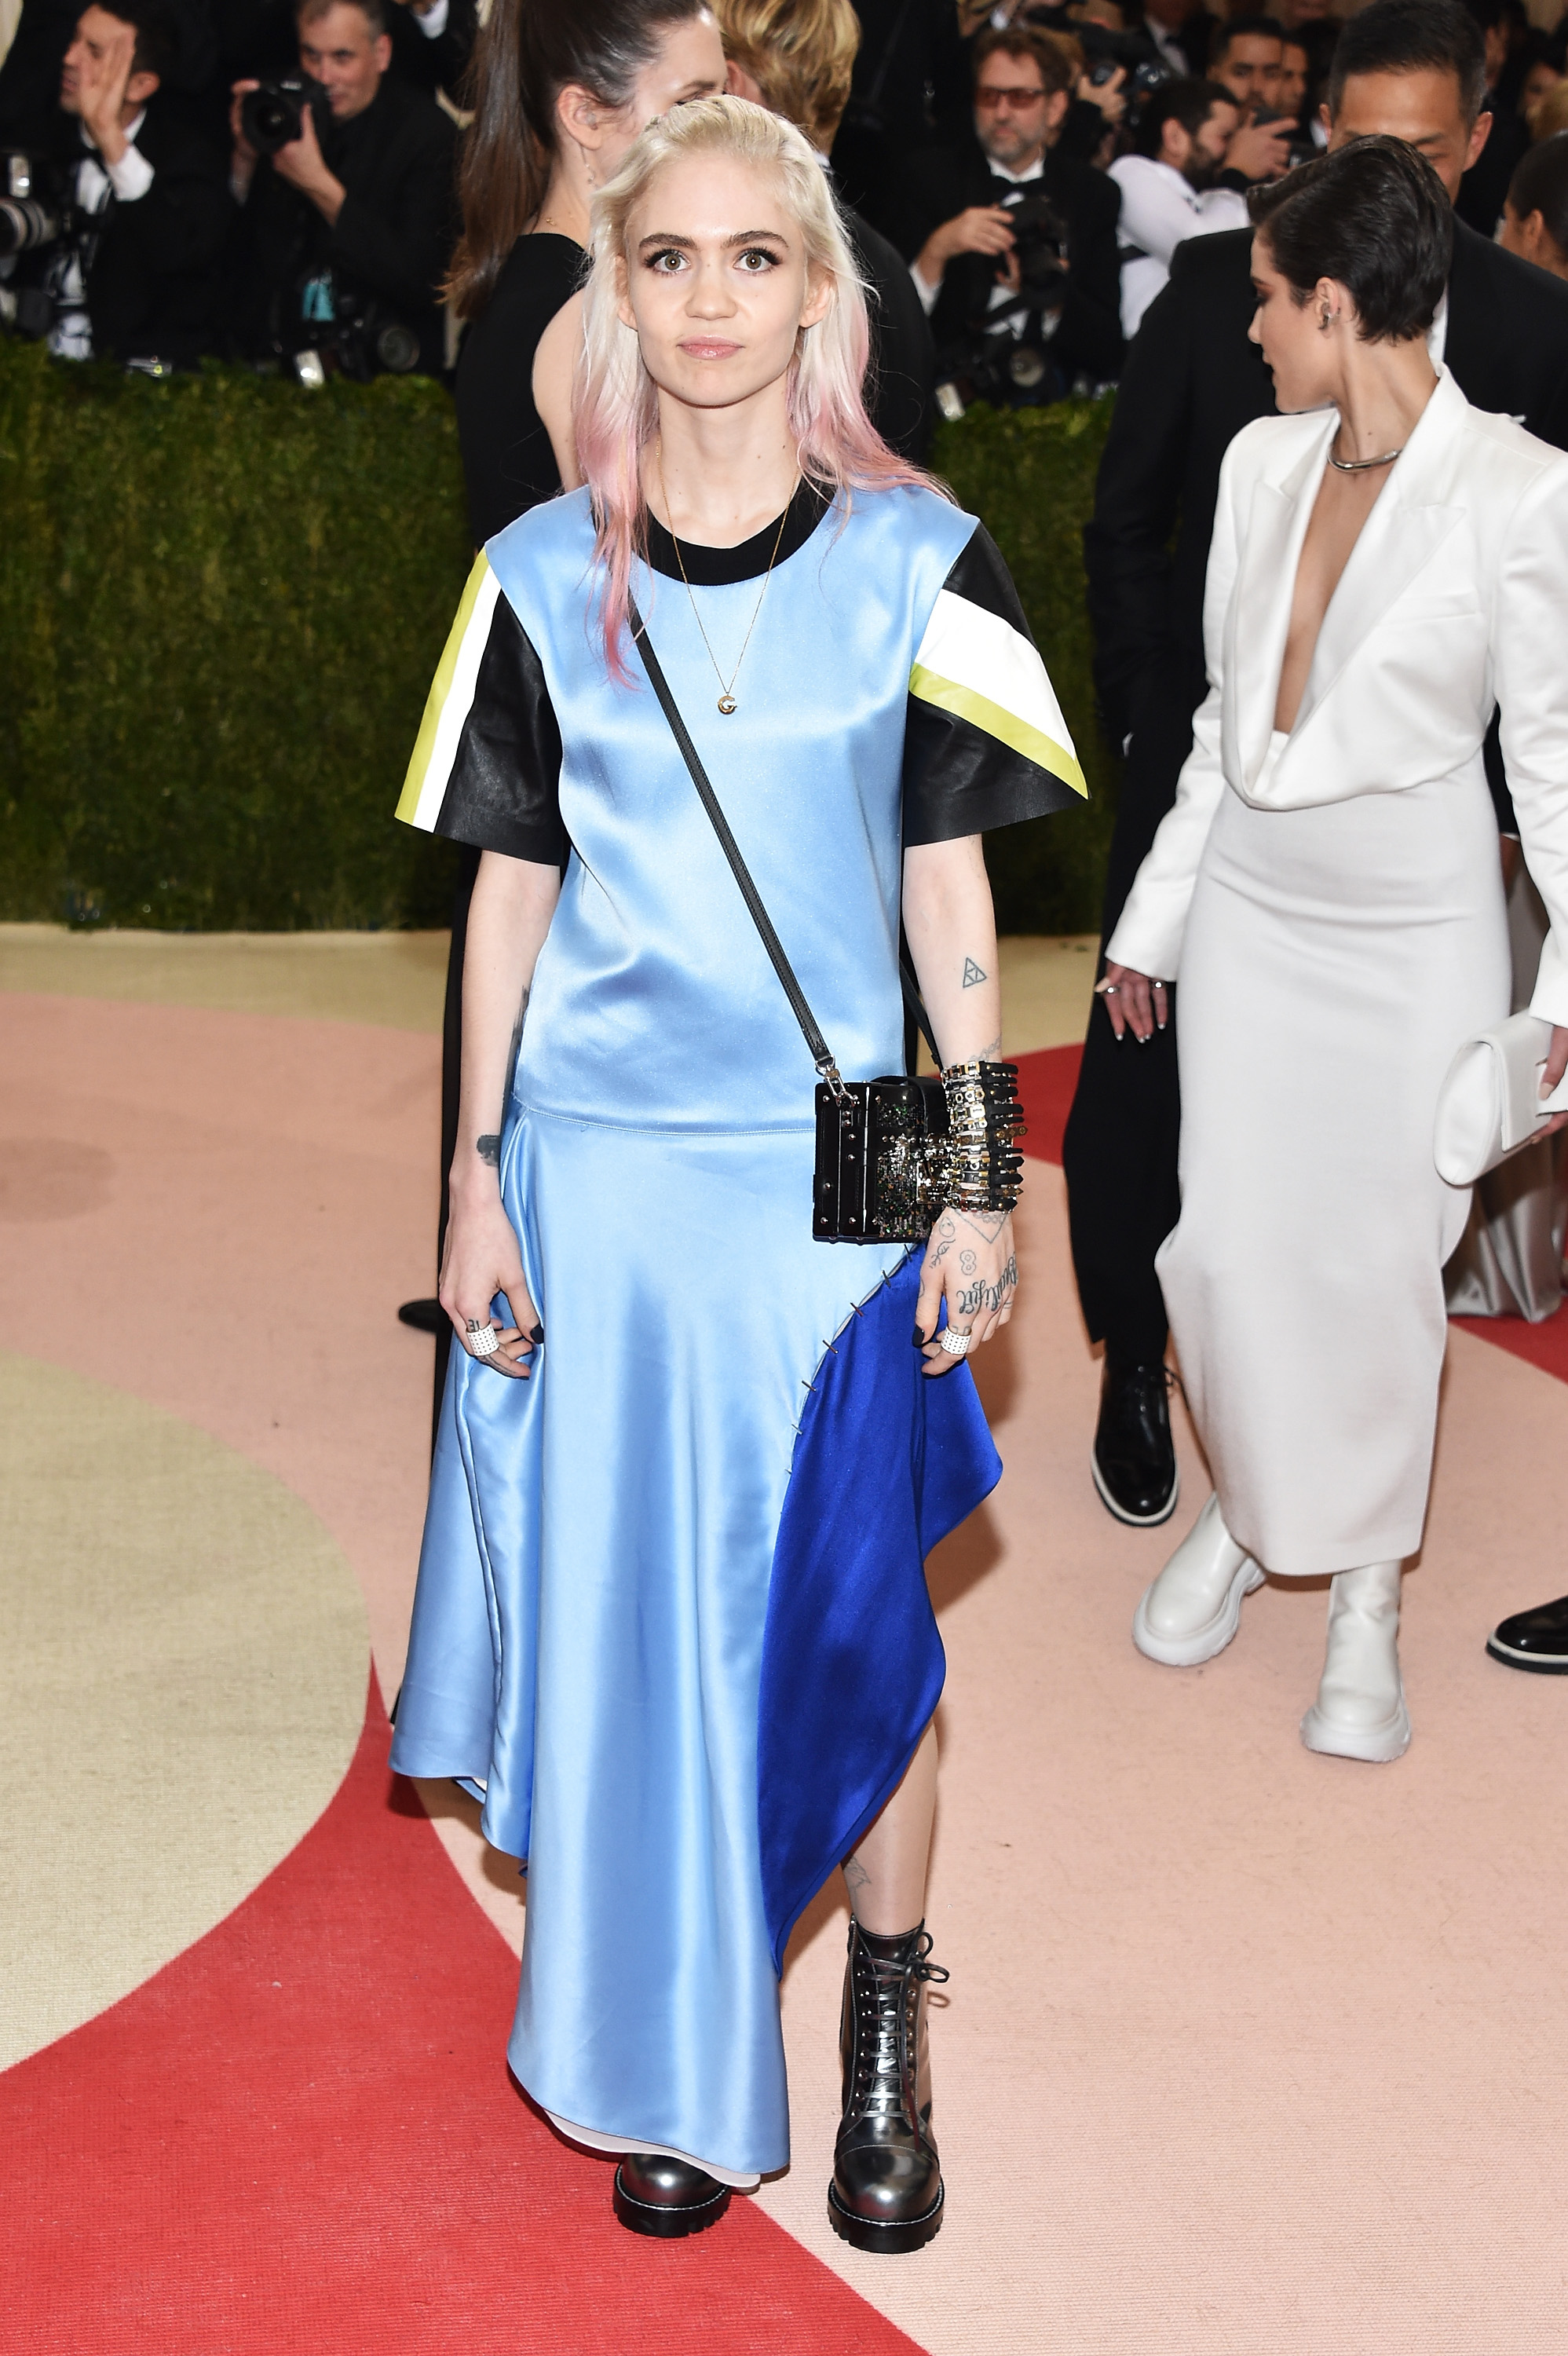 Grimes attends "Manus x Machina: Fashion In An Age Of Technology" Costume Institute Gala at Metropolitan Museum of Art on May 2, 2016 in New York City.